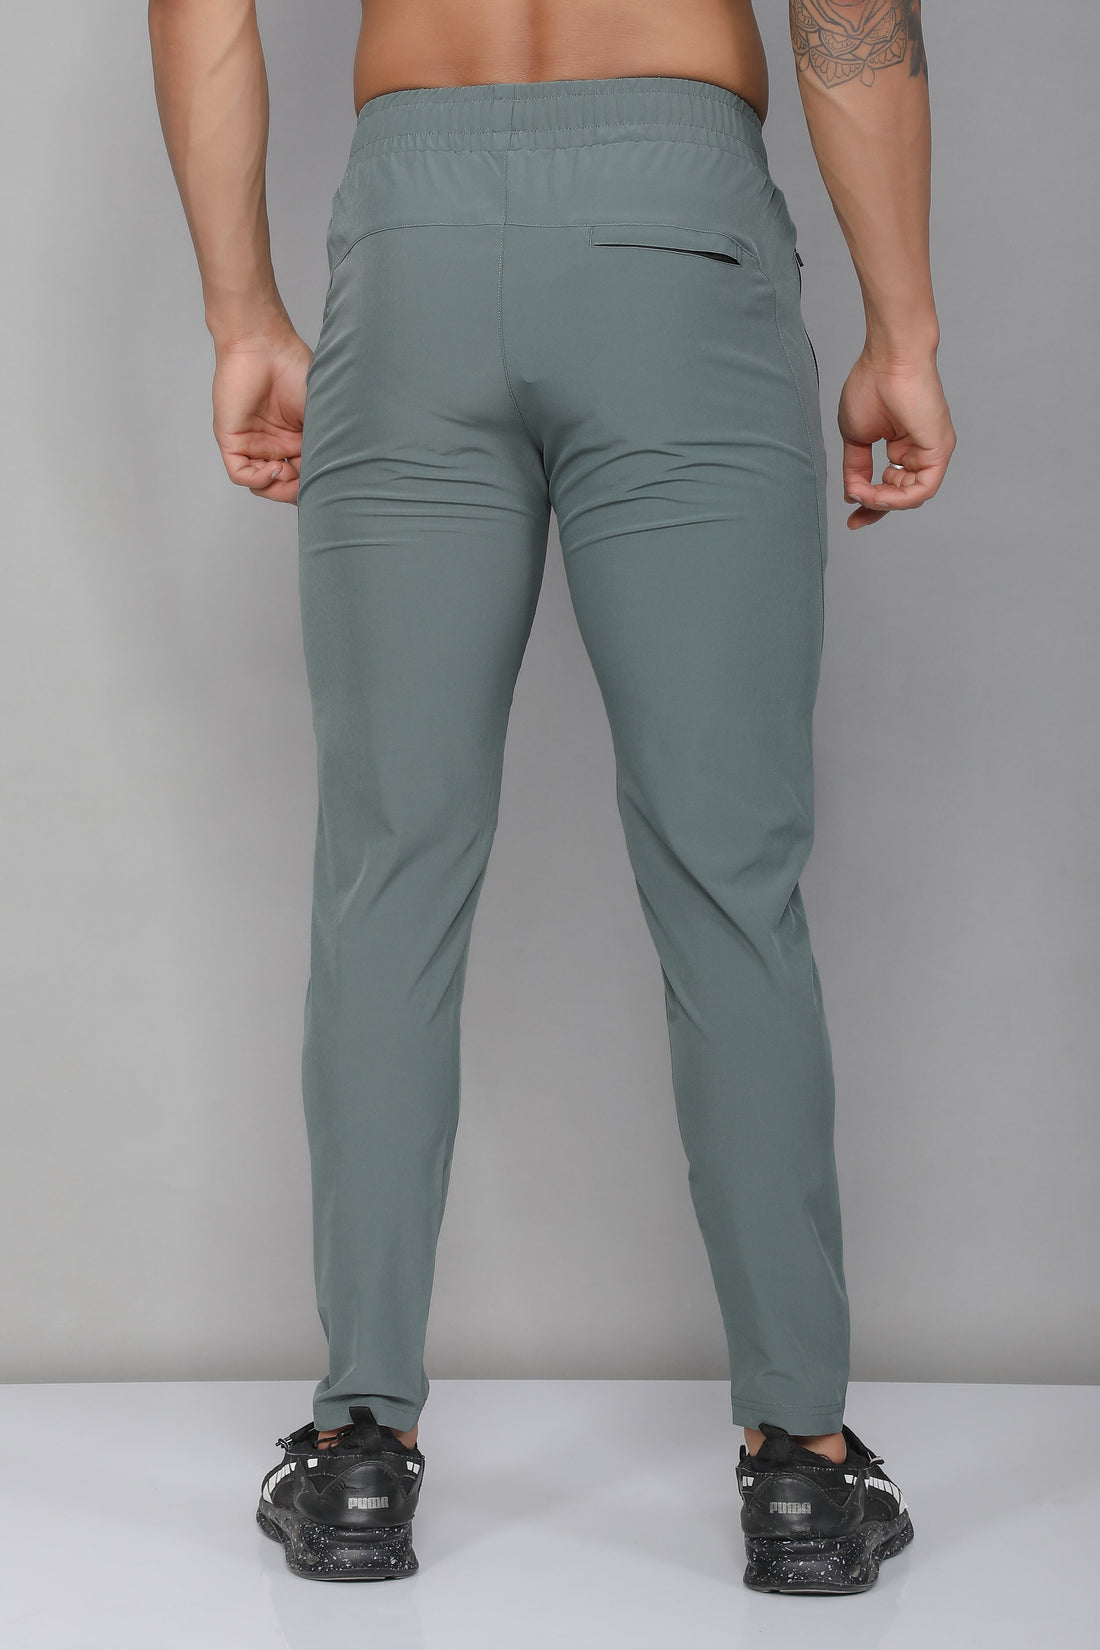 Polyester Lycra Mens Track Pant in Delhi - Dealers, Manufacturers &  Suppliers -Justdial